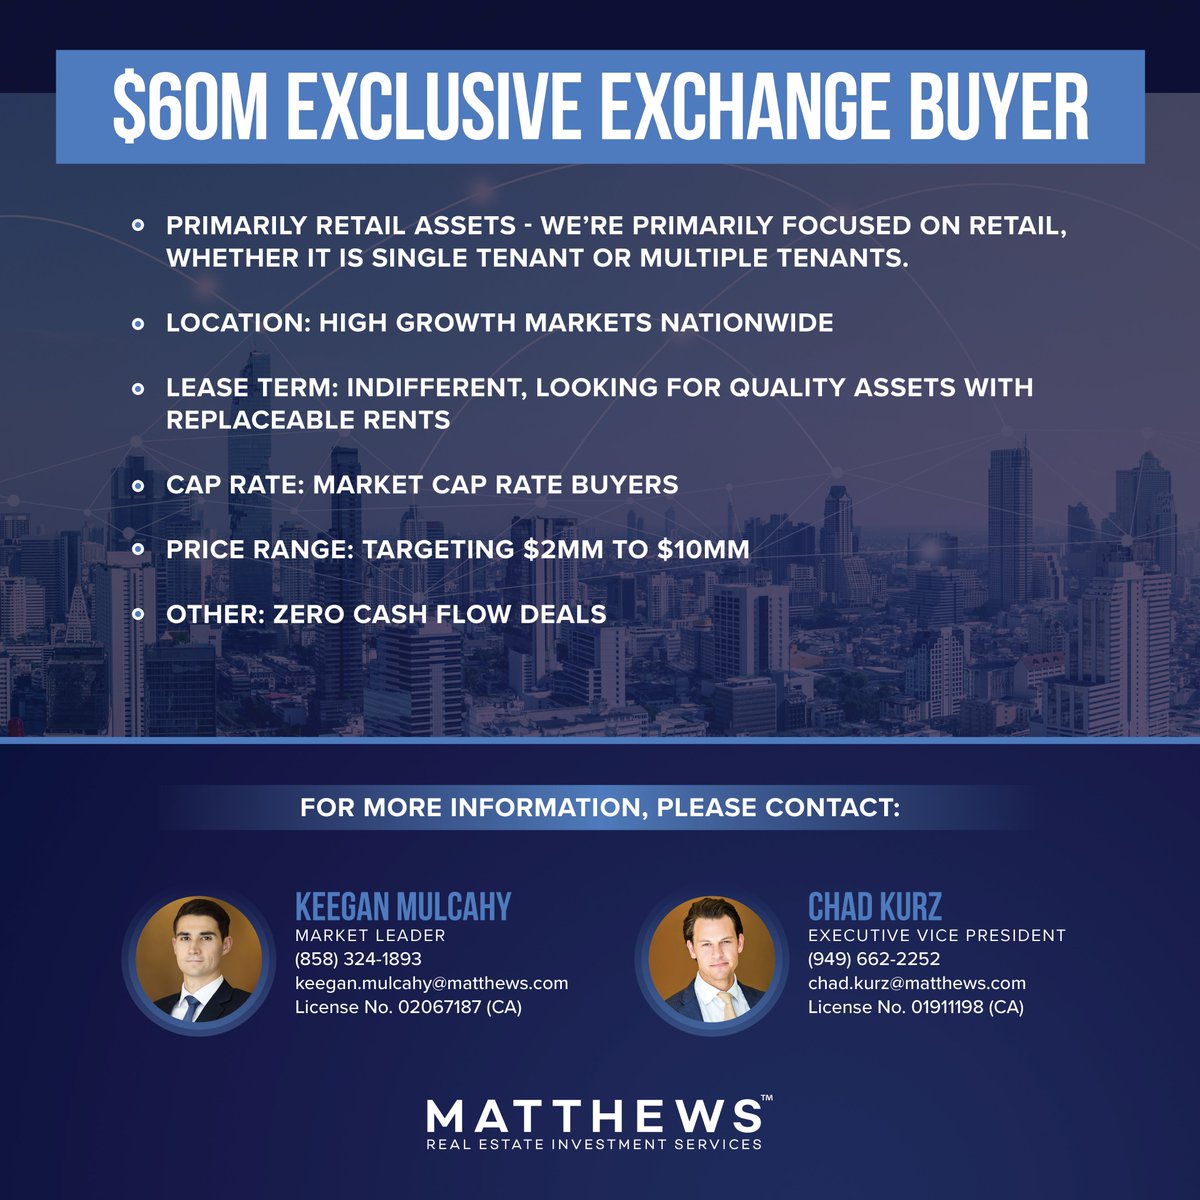 Deal alert 🚨

If your investment matches the criteria below, please reach out to Keegan Mulcahy and Chad Kurz ☎️

#Matthews #CRE #RealEstate #RetailInvestment #InvestmentSales